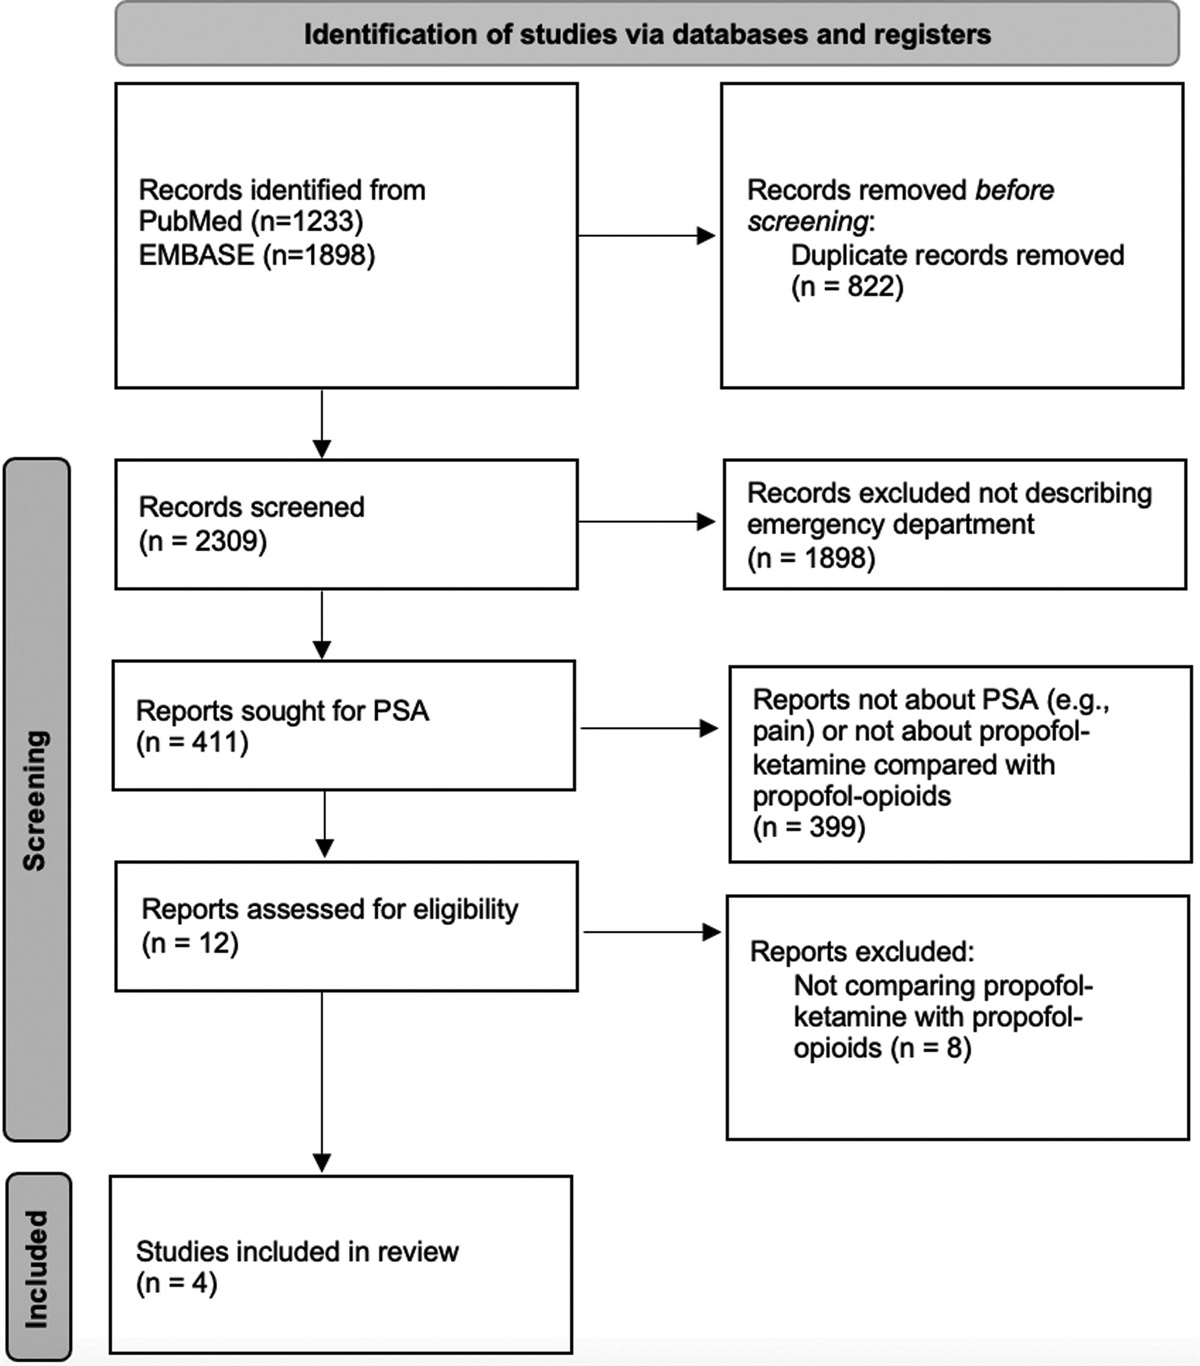 Low-dose ketamine or opioids combined with propofol for procedural sedation in the emergency department: a systematic review